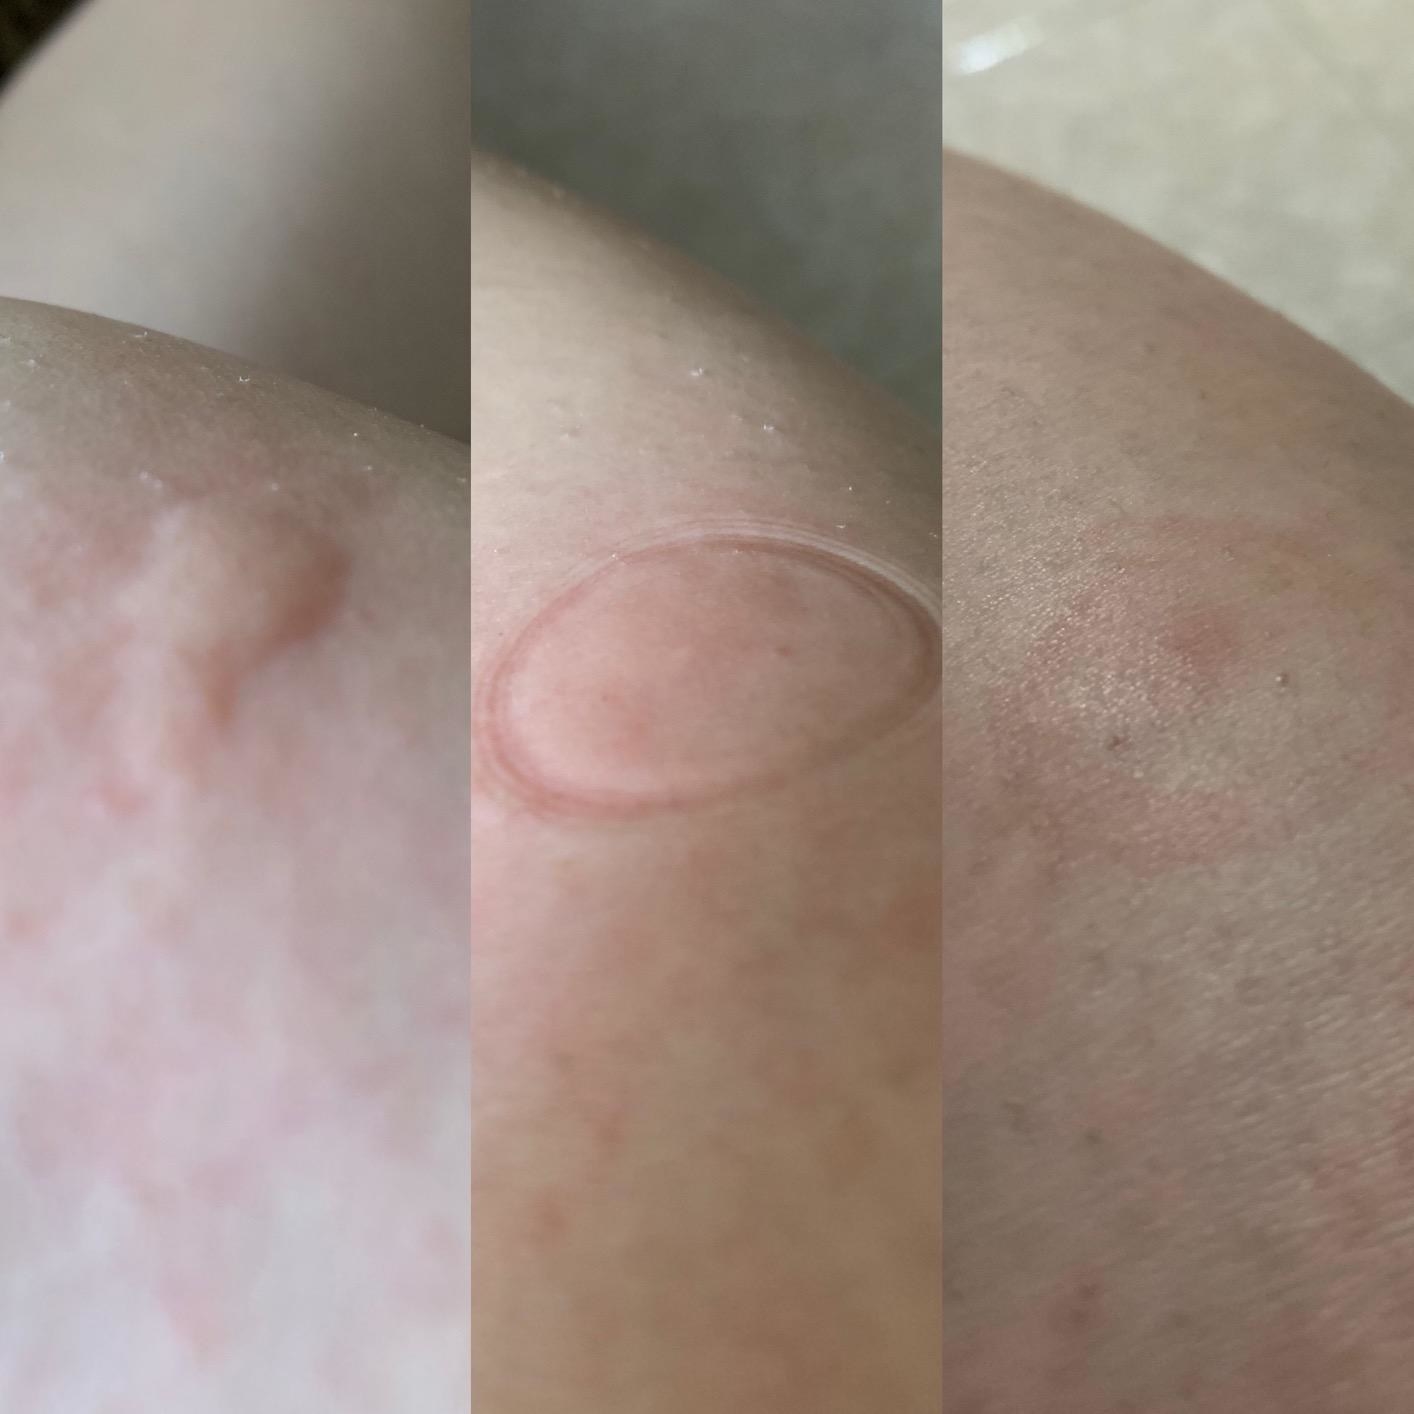 A before and after showing a swollen bug bite going flat